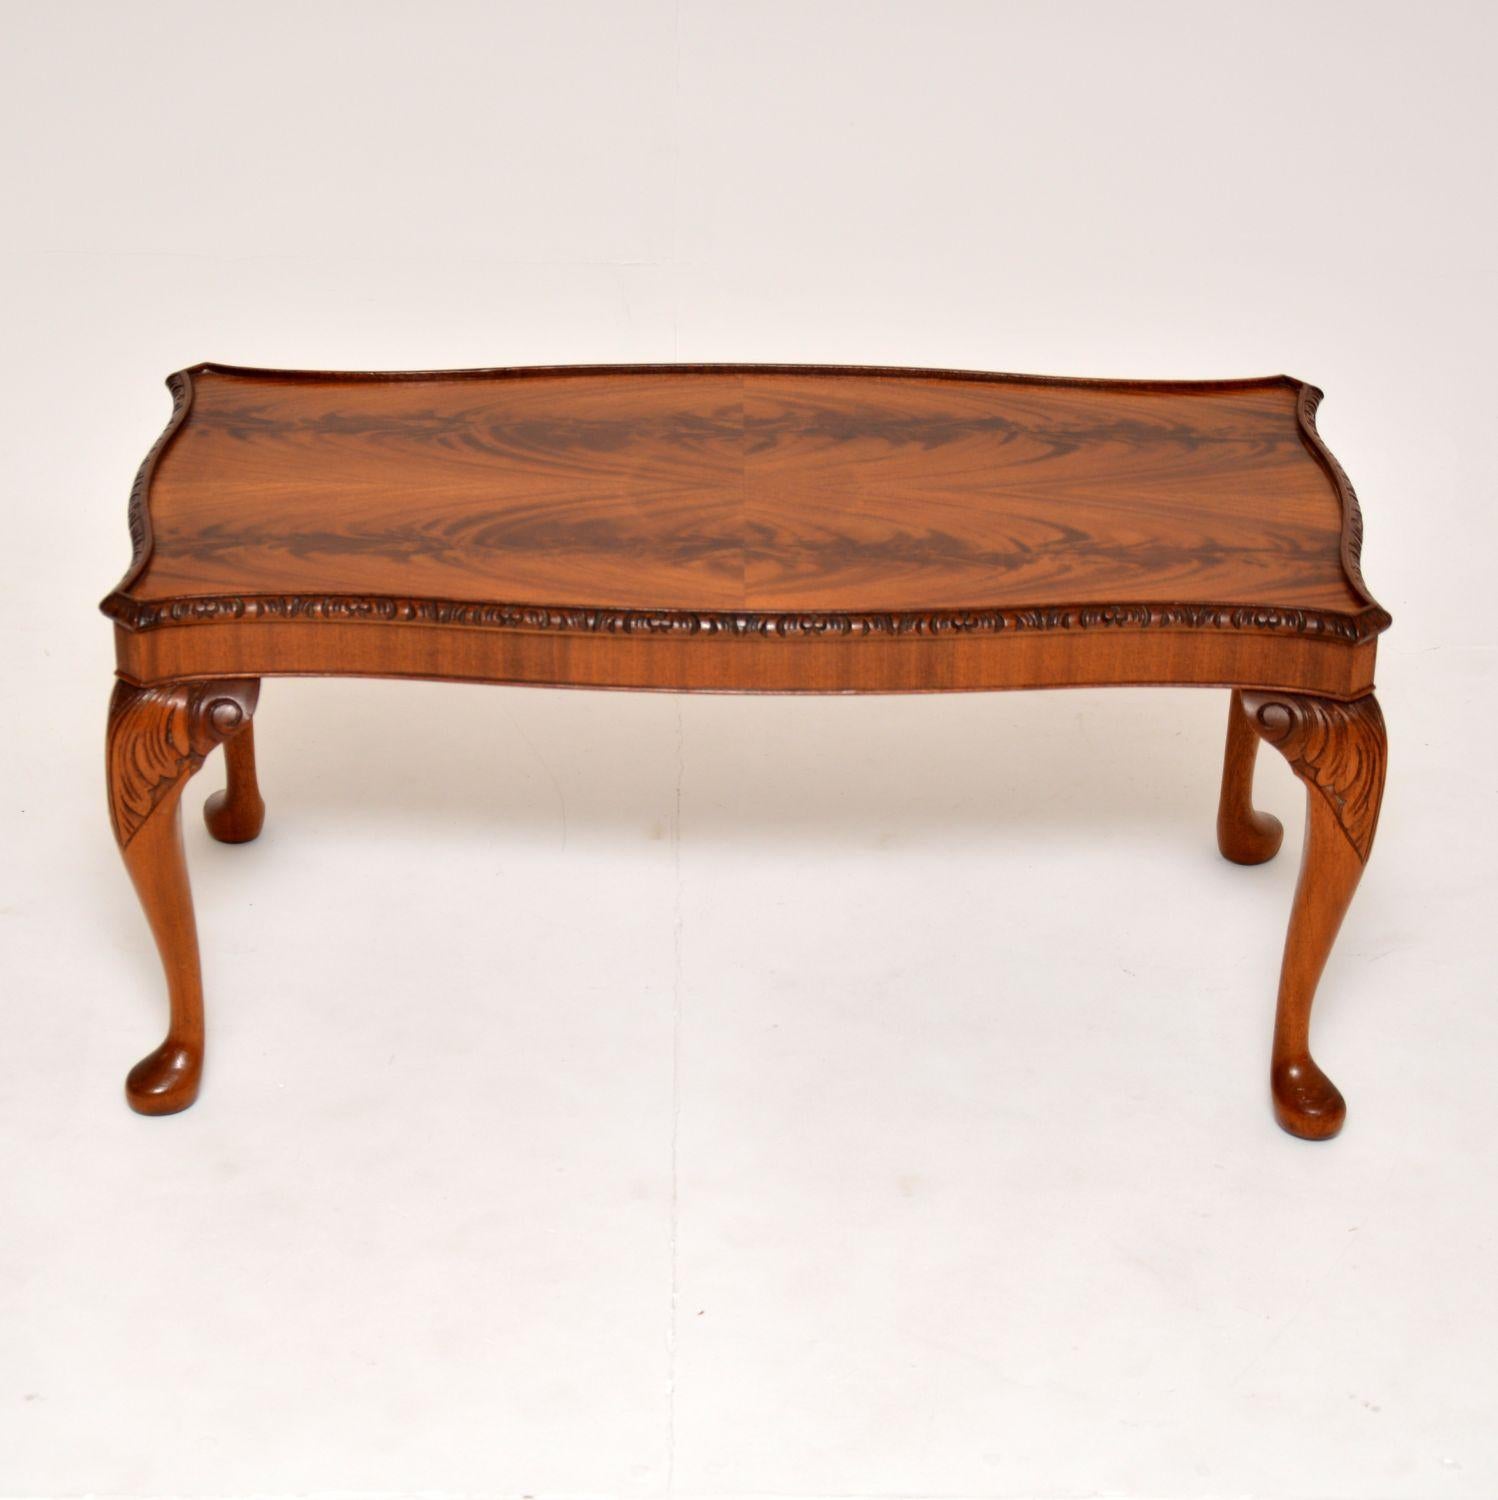 A lovely antique coffee table in the Queen Anne style. This was made in England, it dates from the 1920-30’s.

It is of fantastic quality, with beautifully carved serpentine edges. It sits on sturdy cabriole legs with fine acanthus leaf carving. The